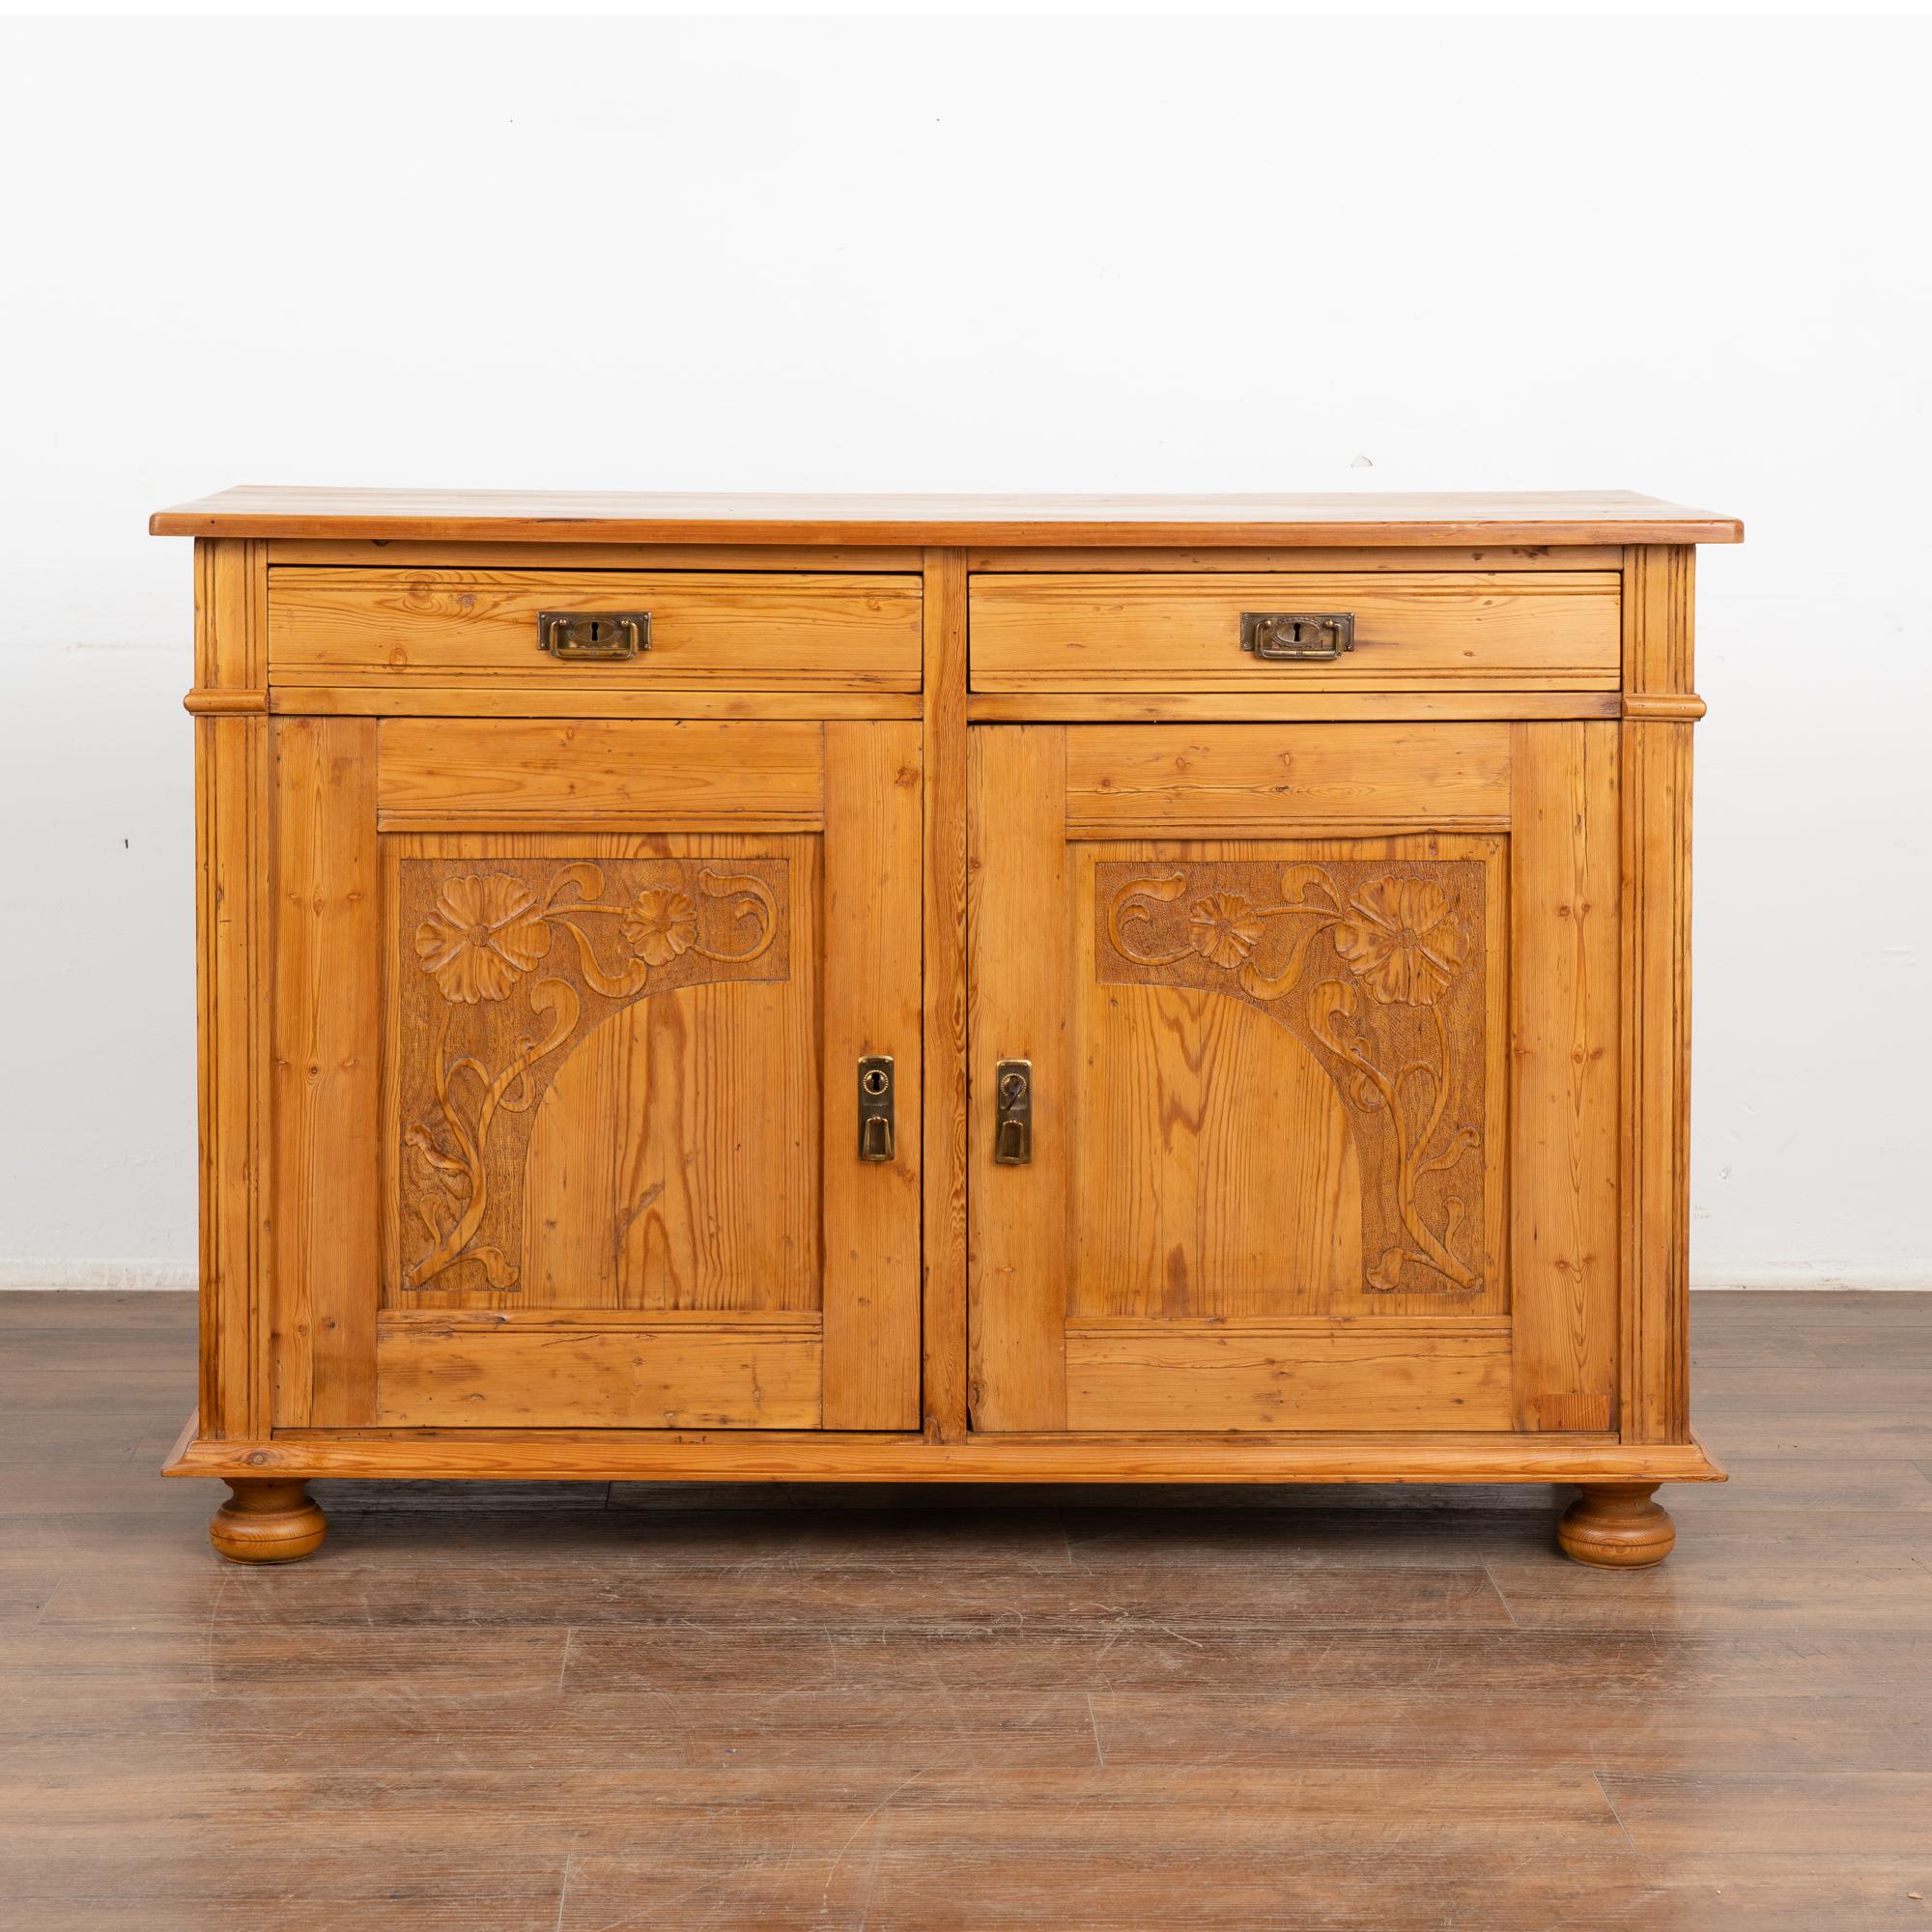 Danish Pine Sideboard Cabinet With Floral Carving, Denmark circa 1890